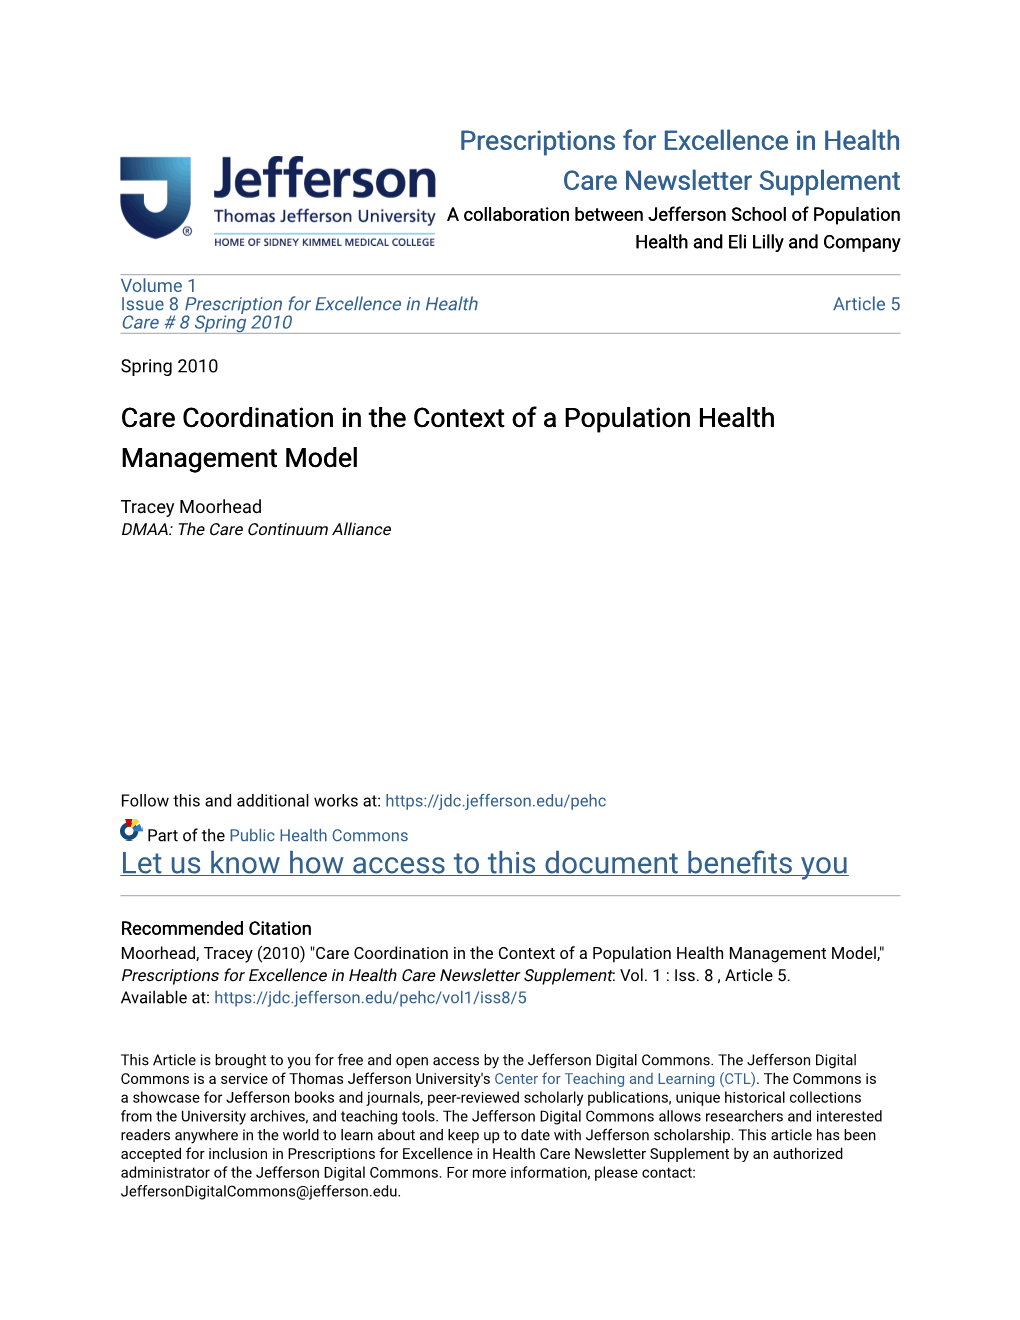 Care Coordination in the Context of a Population Health Management Model